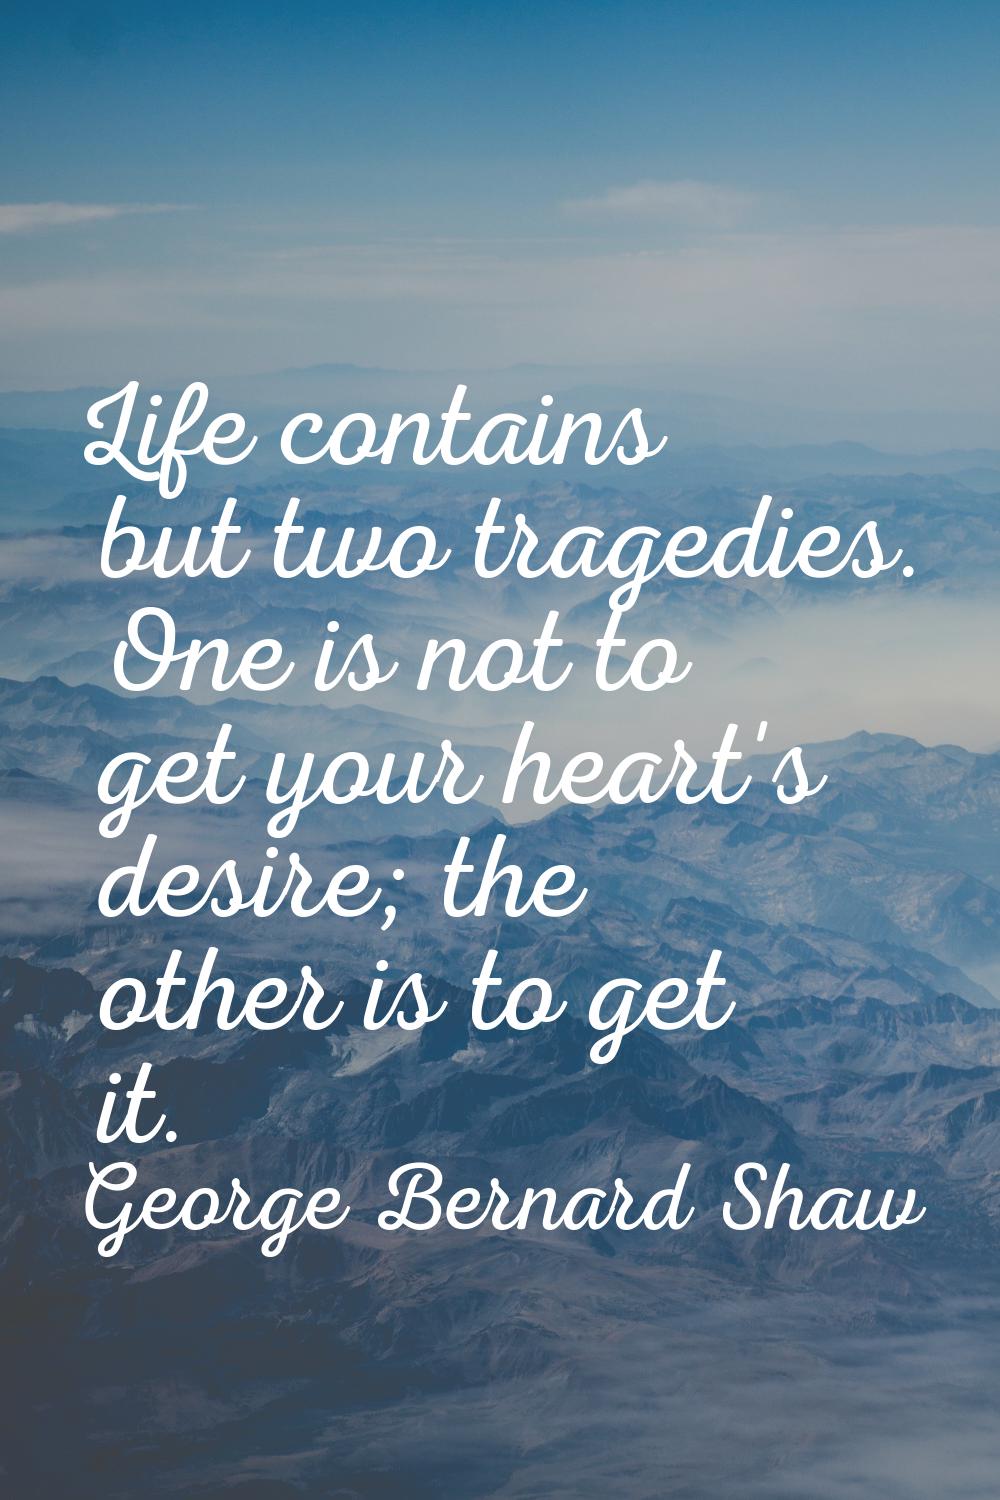 Life contains but two tragedies. One is not to get your heart's desire; the other is to get it.